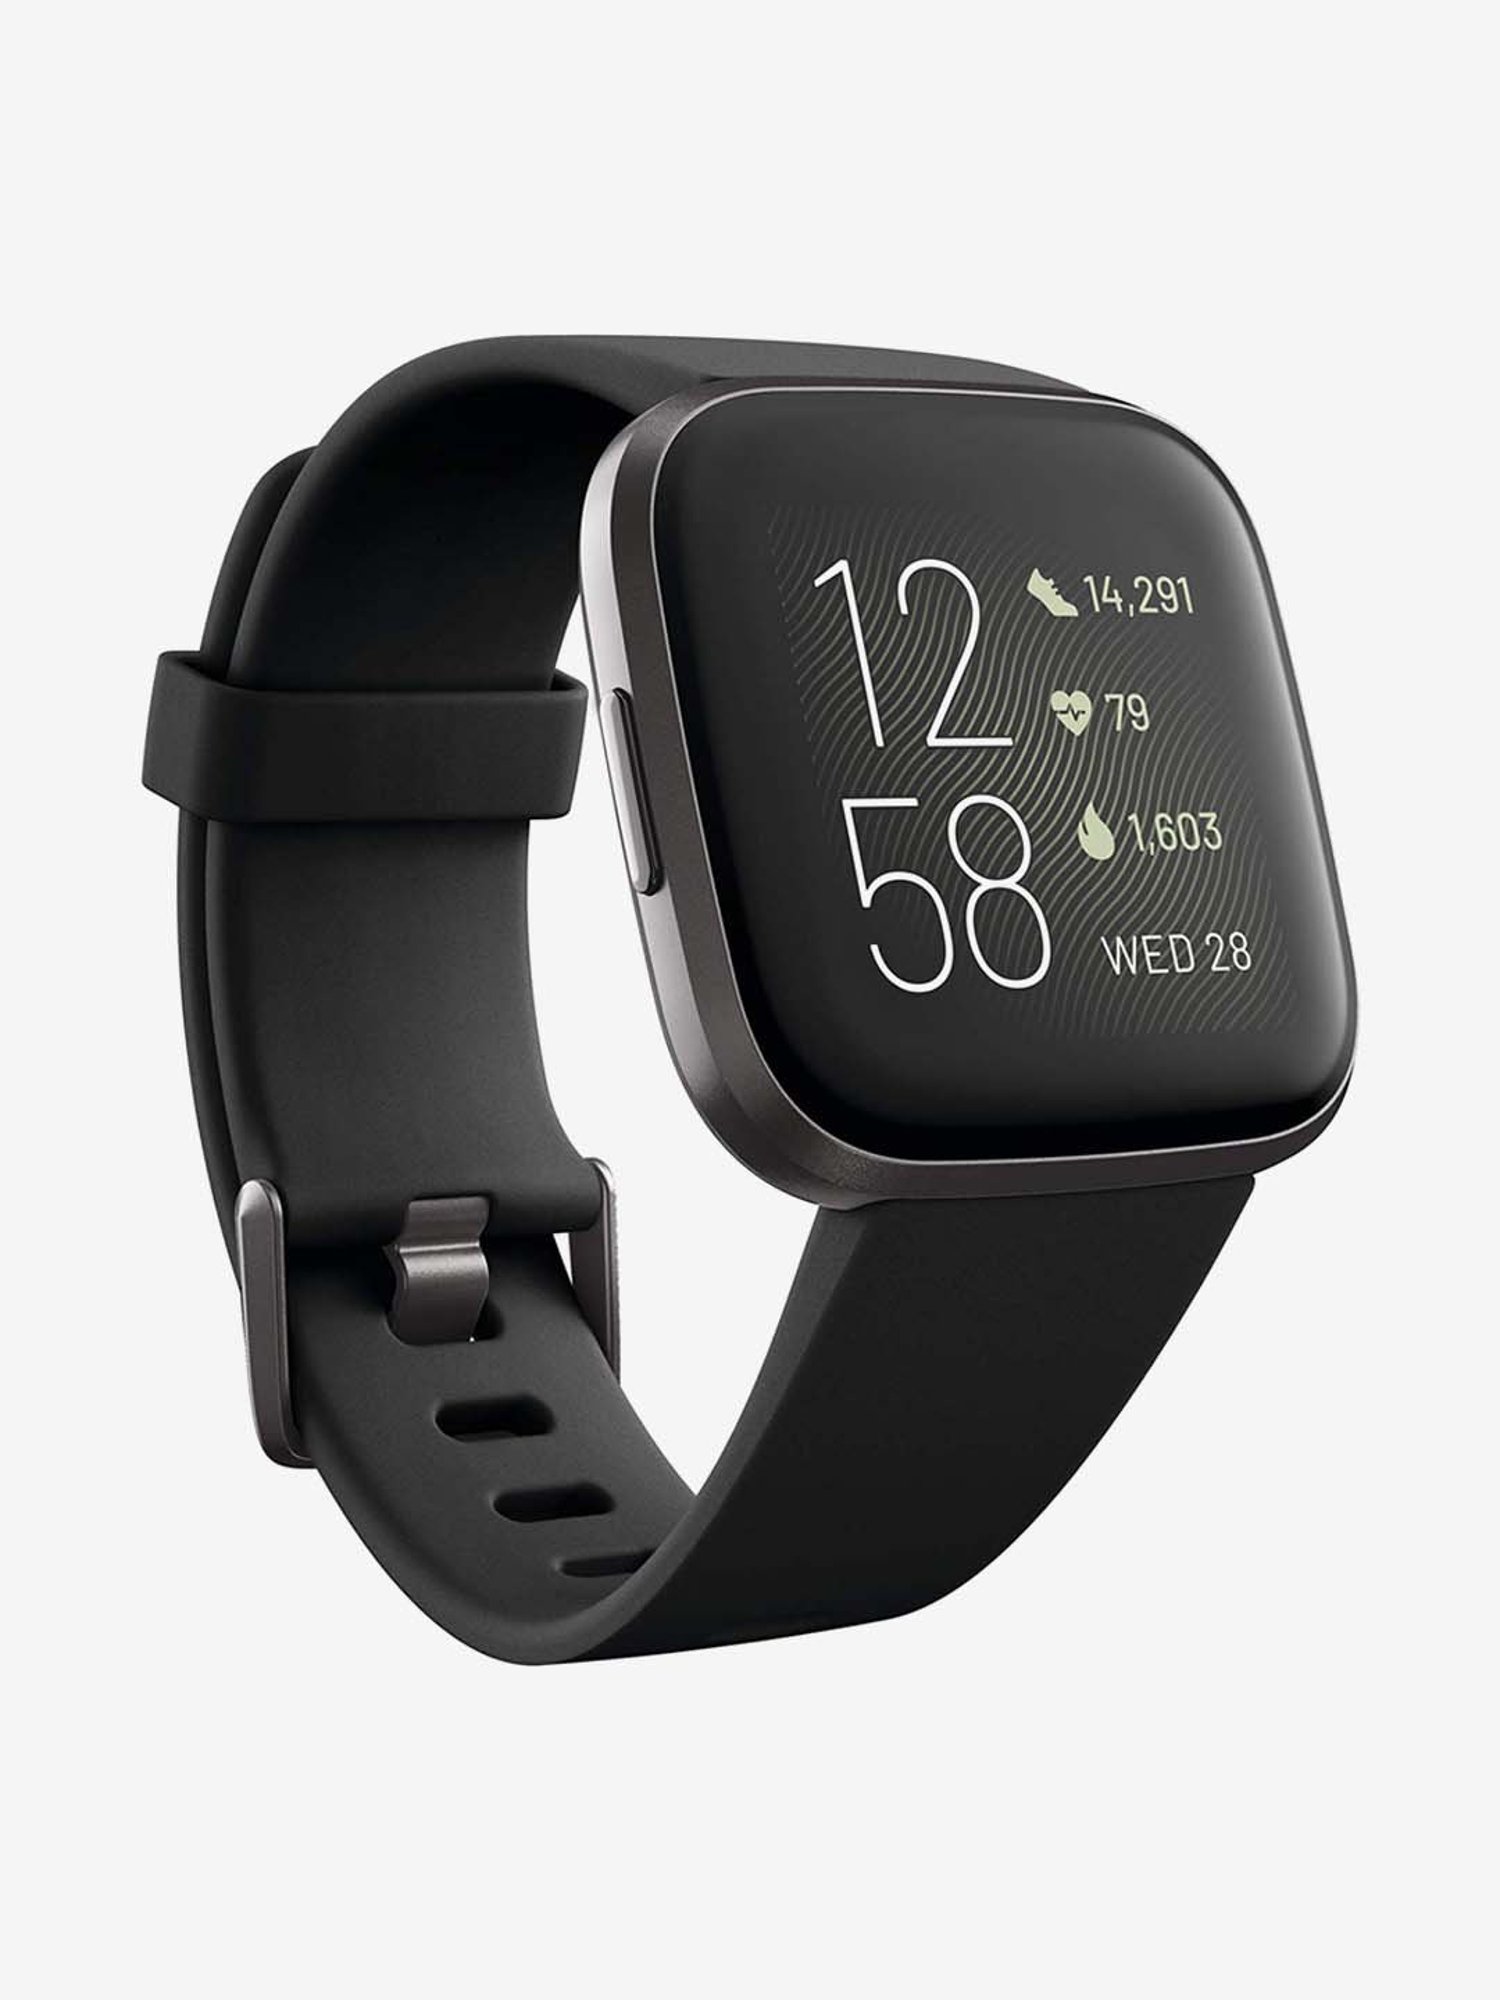 fitbit coupon 2020